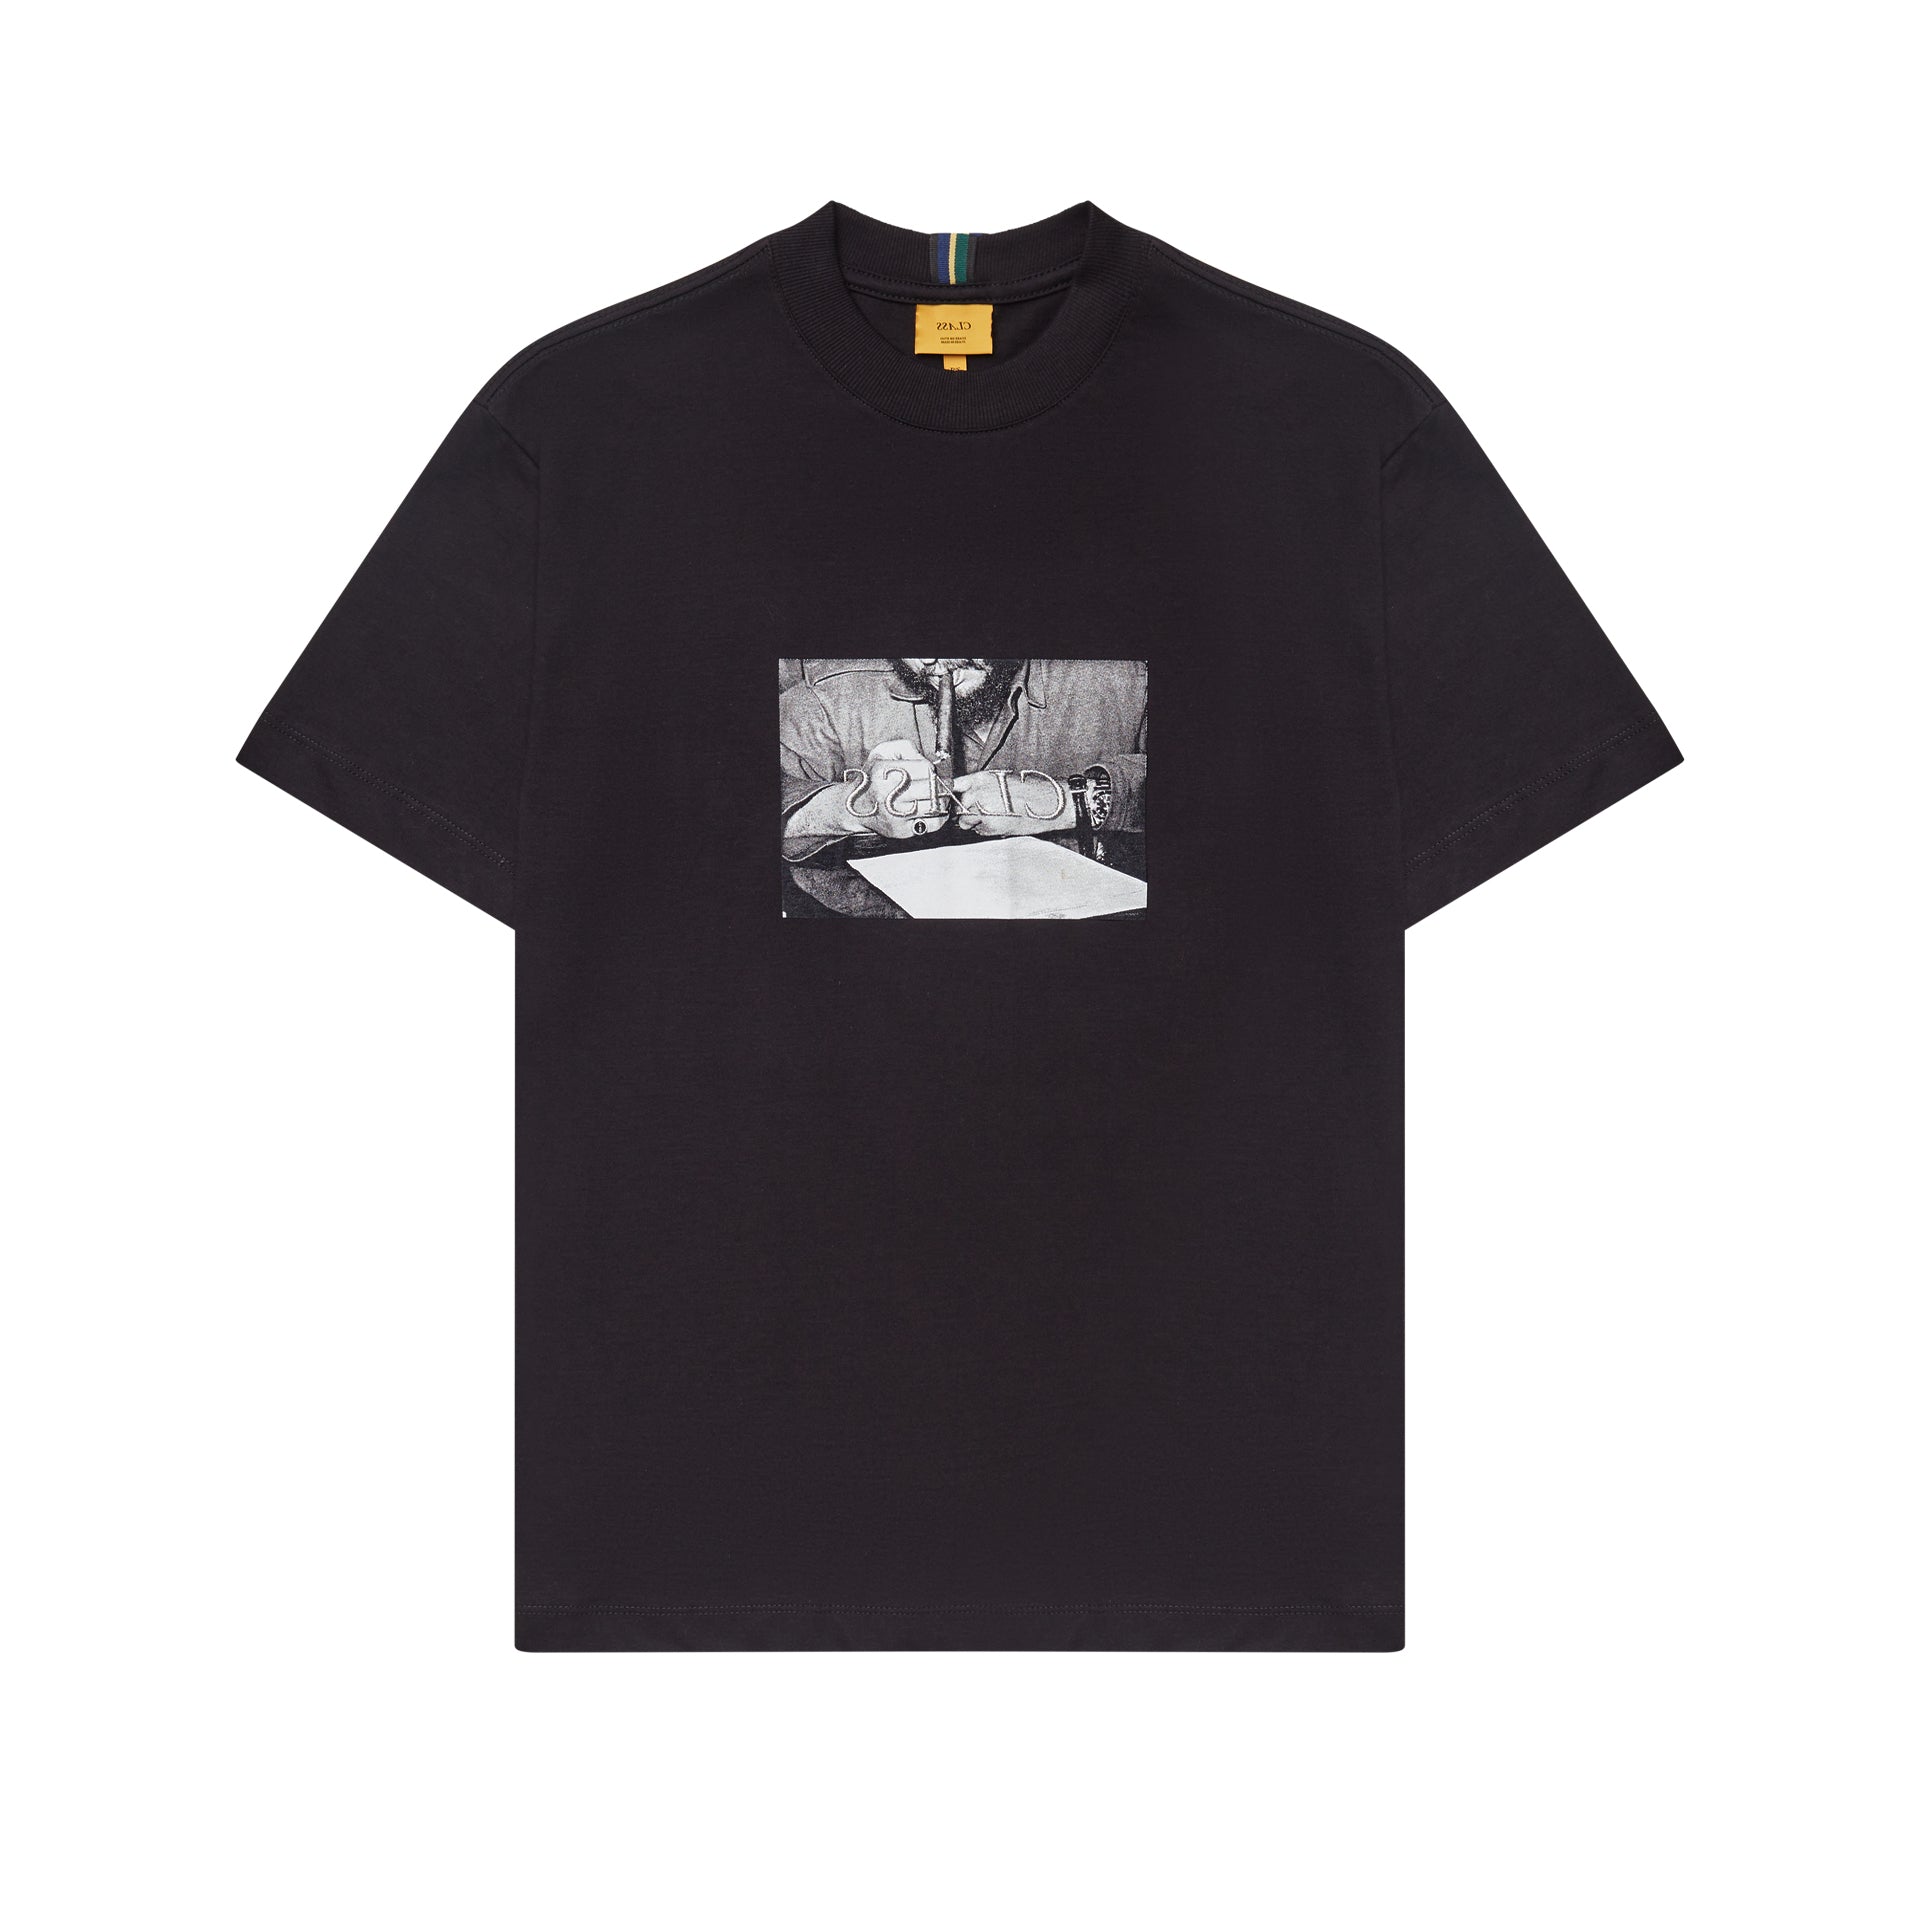 CLASS - T-Shirt A Time For Revolution Black